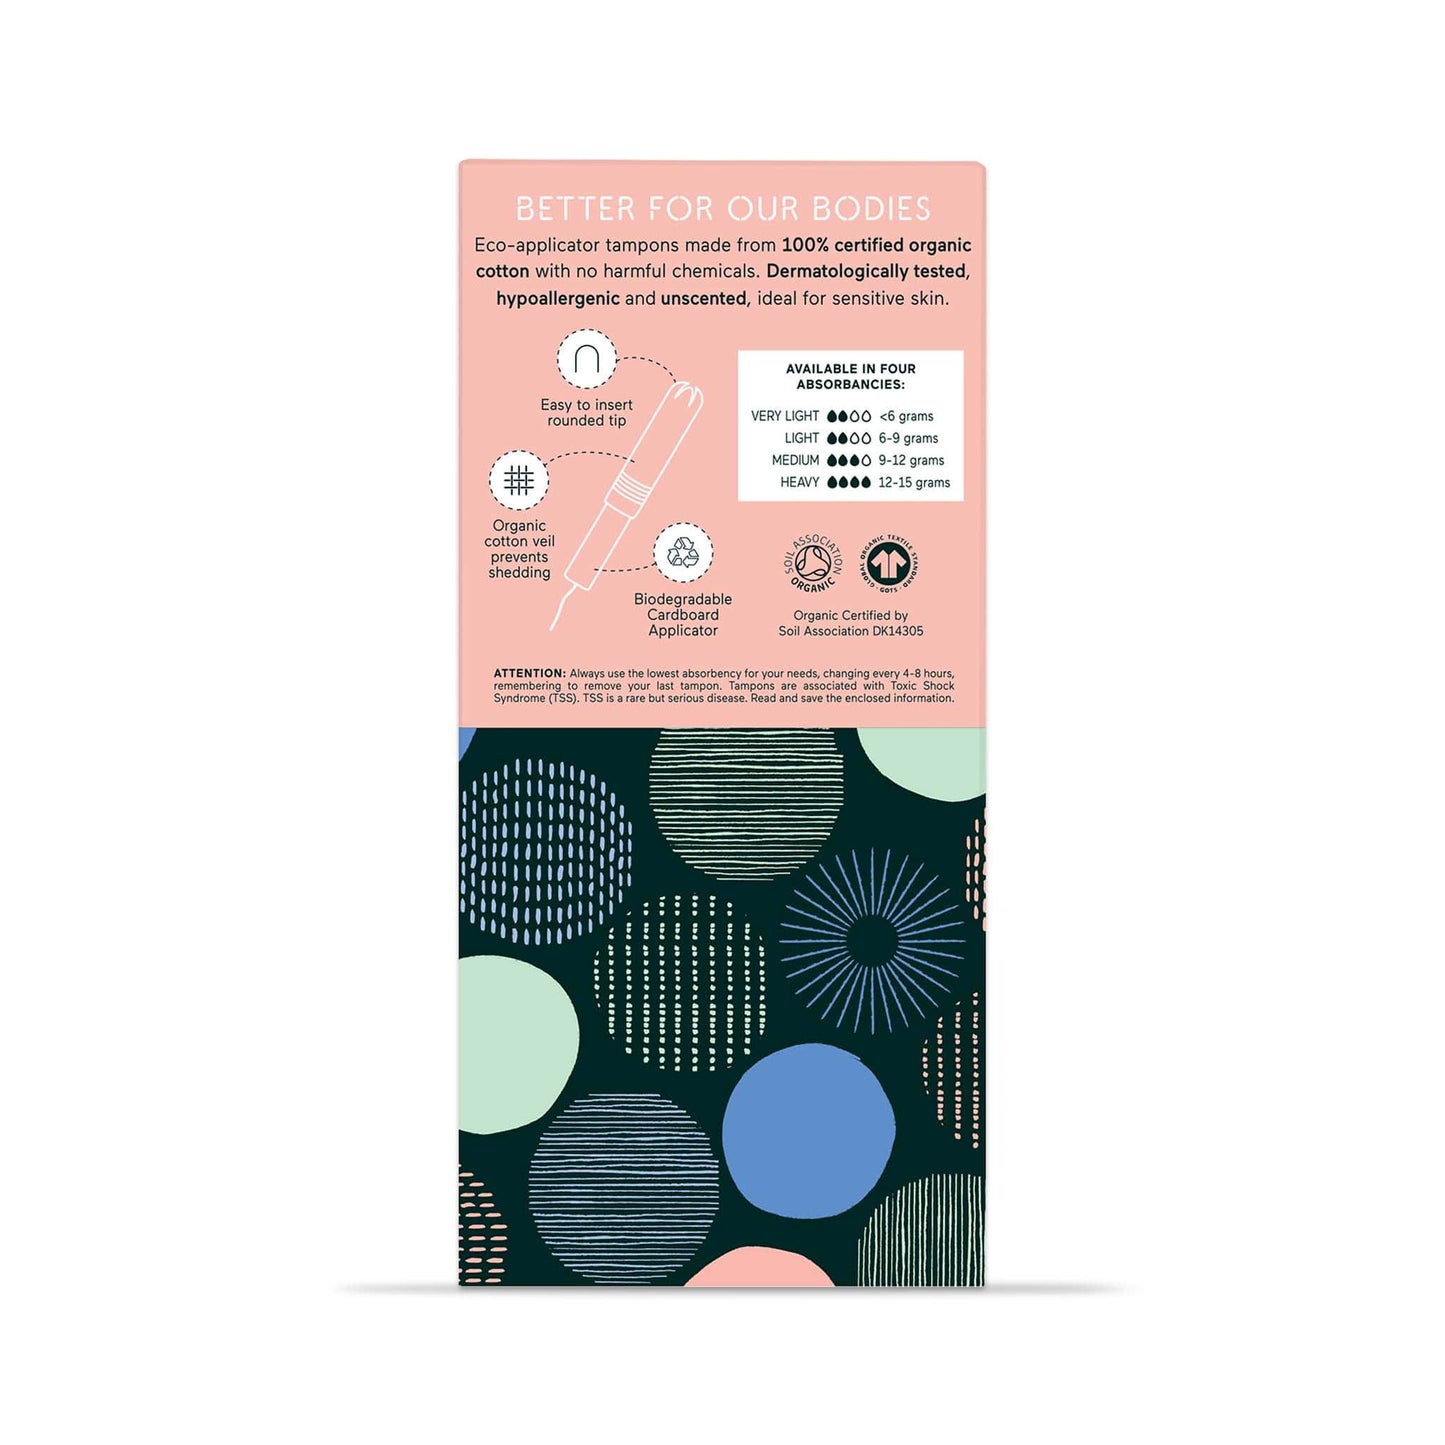 & SISTERS Tampons Eco-applicator Tampons - Plastic-Free and Organic Cotton - & SISTERS